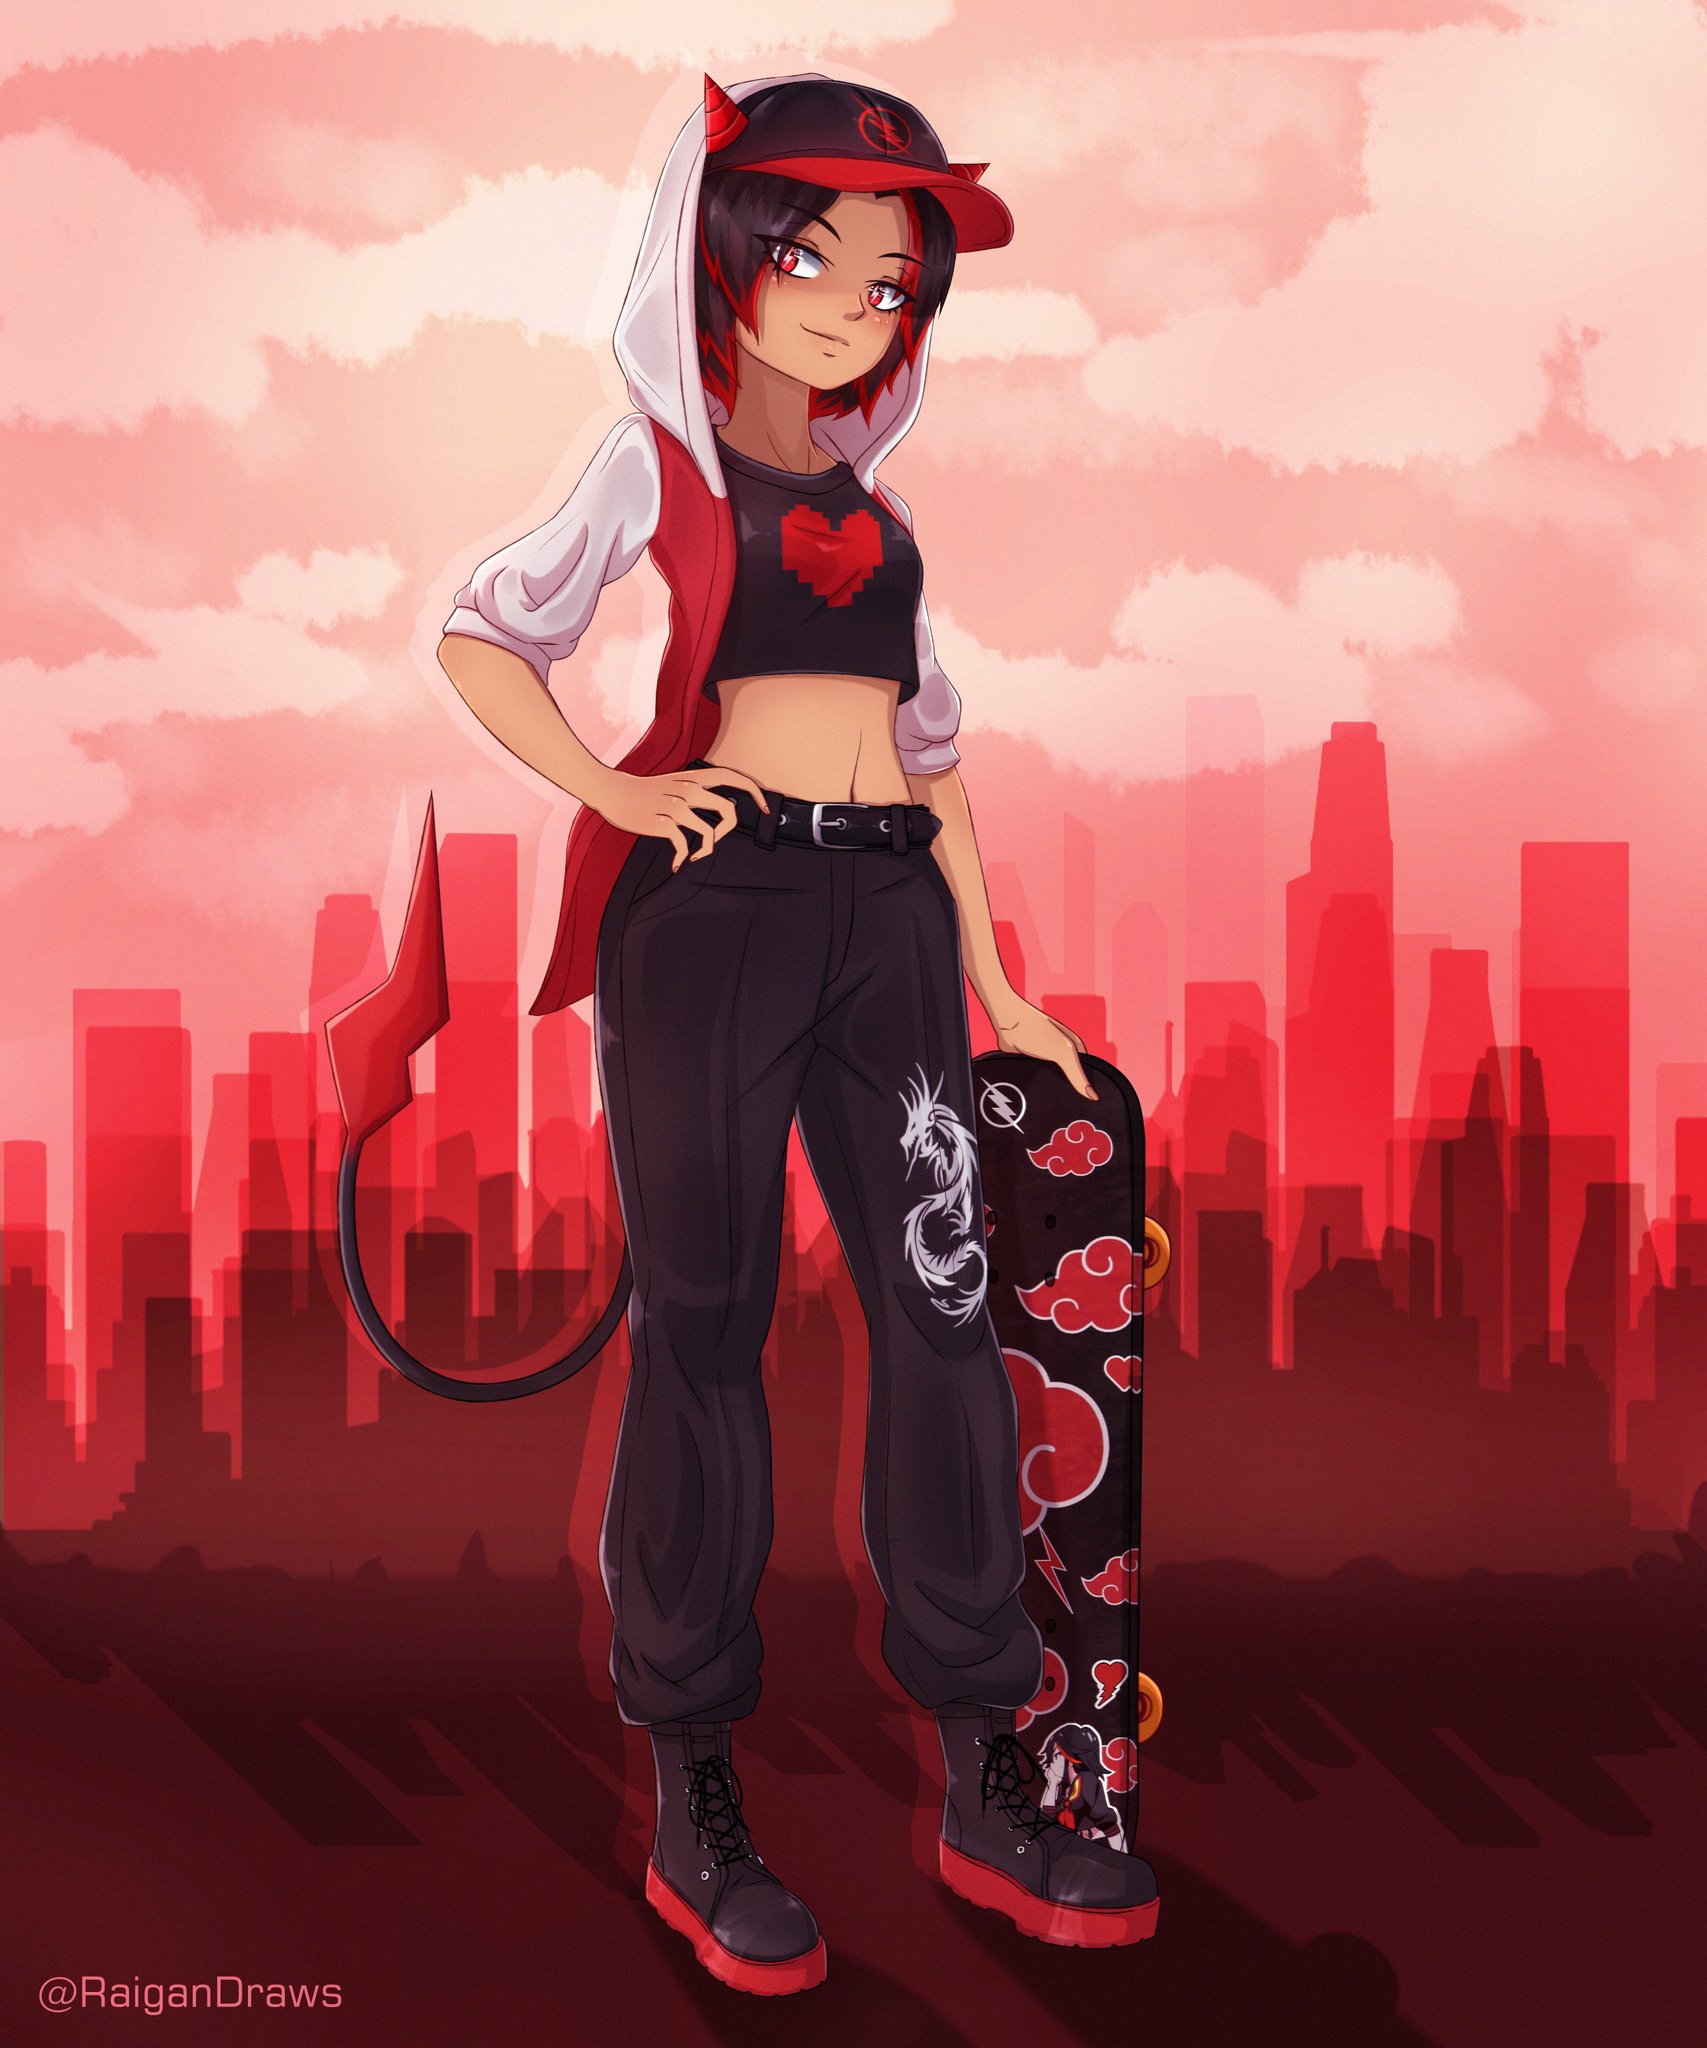 Anime girl with blue hair and a red scarf skateboarding